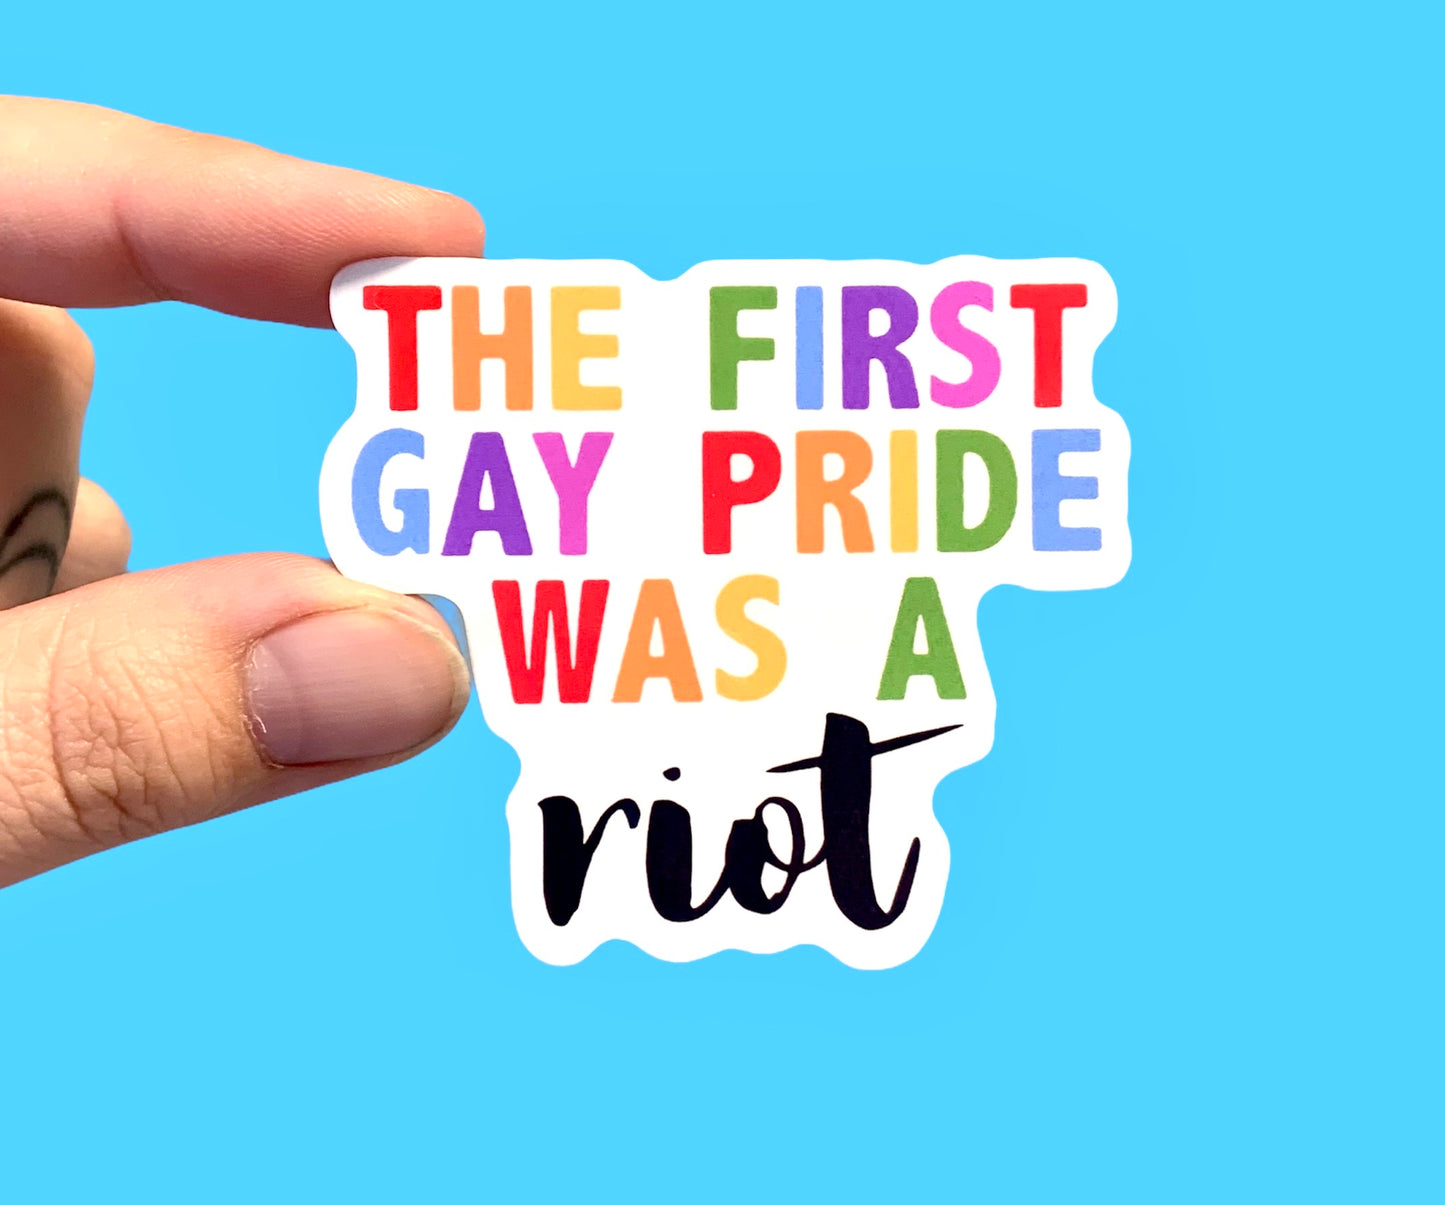 The first gay pride was a riot